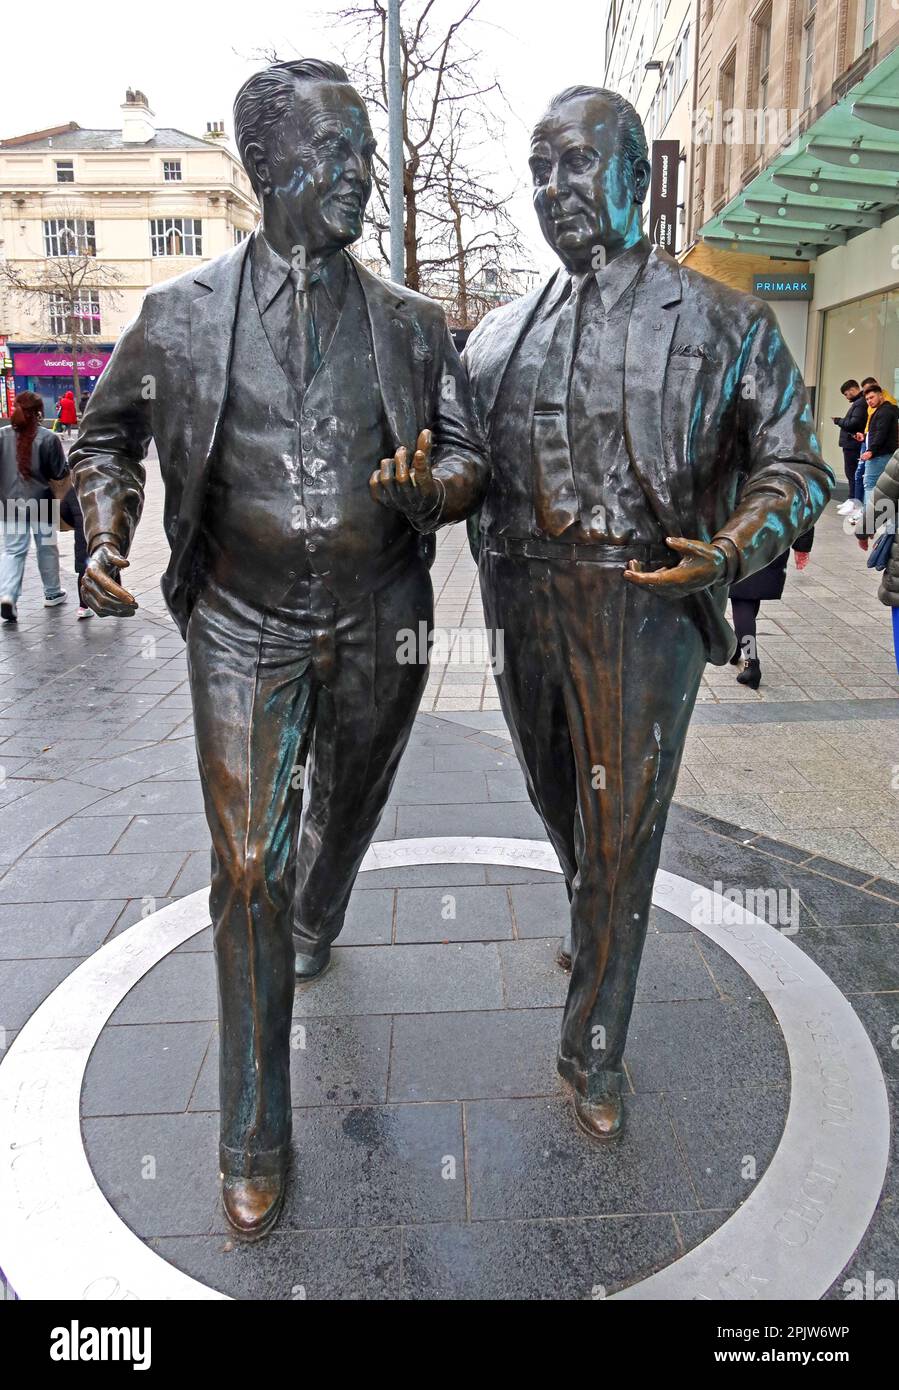 1996 bronze Sculpture of Sir John CBE & Cecil Moores, of Littlewoods by Tom Murphy, Church St, Liverpool, Merseyside, England, UK, L1 3AY Stock Photo